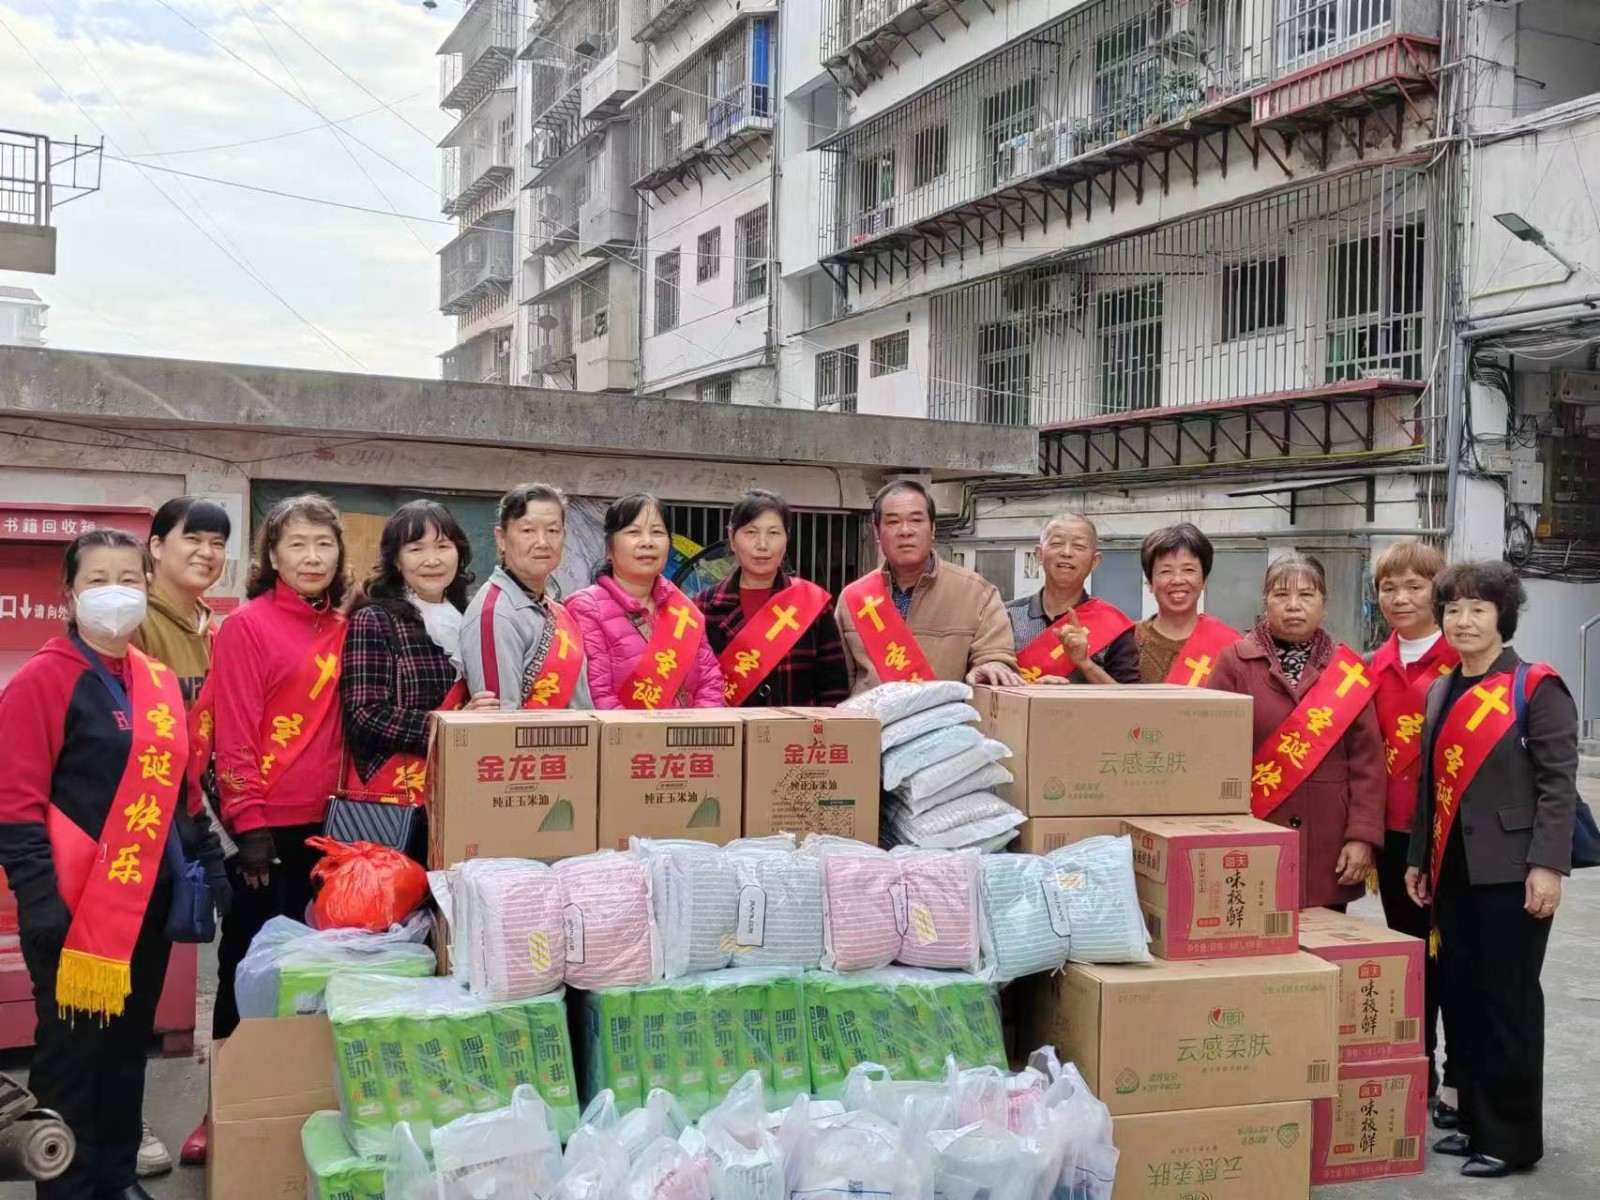 The youth and middle-aged fellowship of the Gospel Church carried out the annual 'Santa Claus Action' to provide care to the needy in Yongan City, Fujian Province, during December 2023.